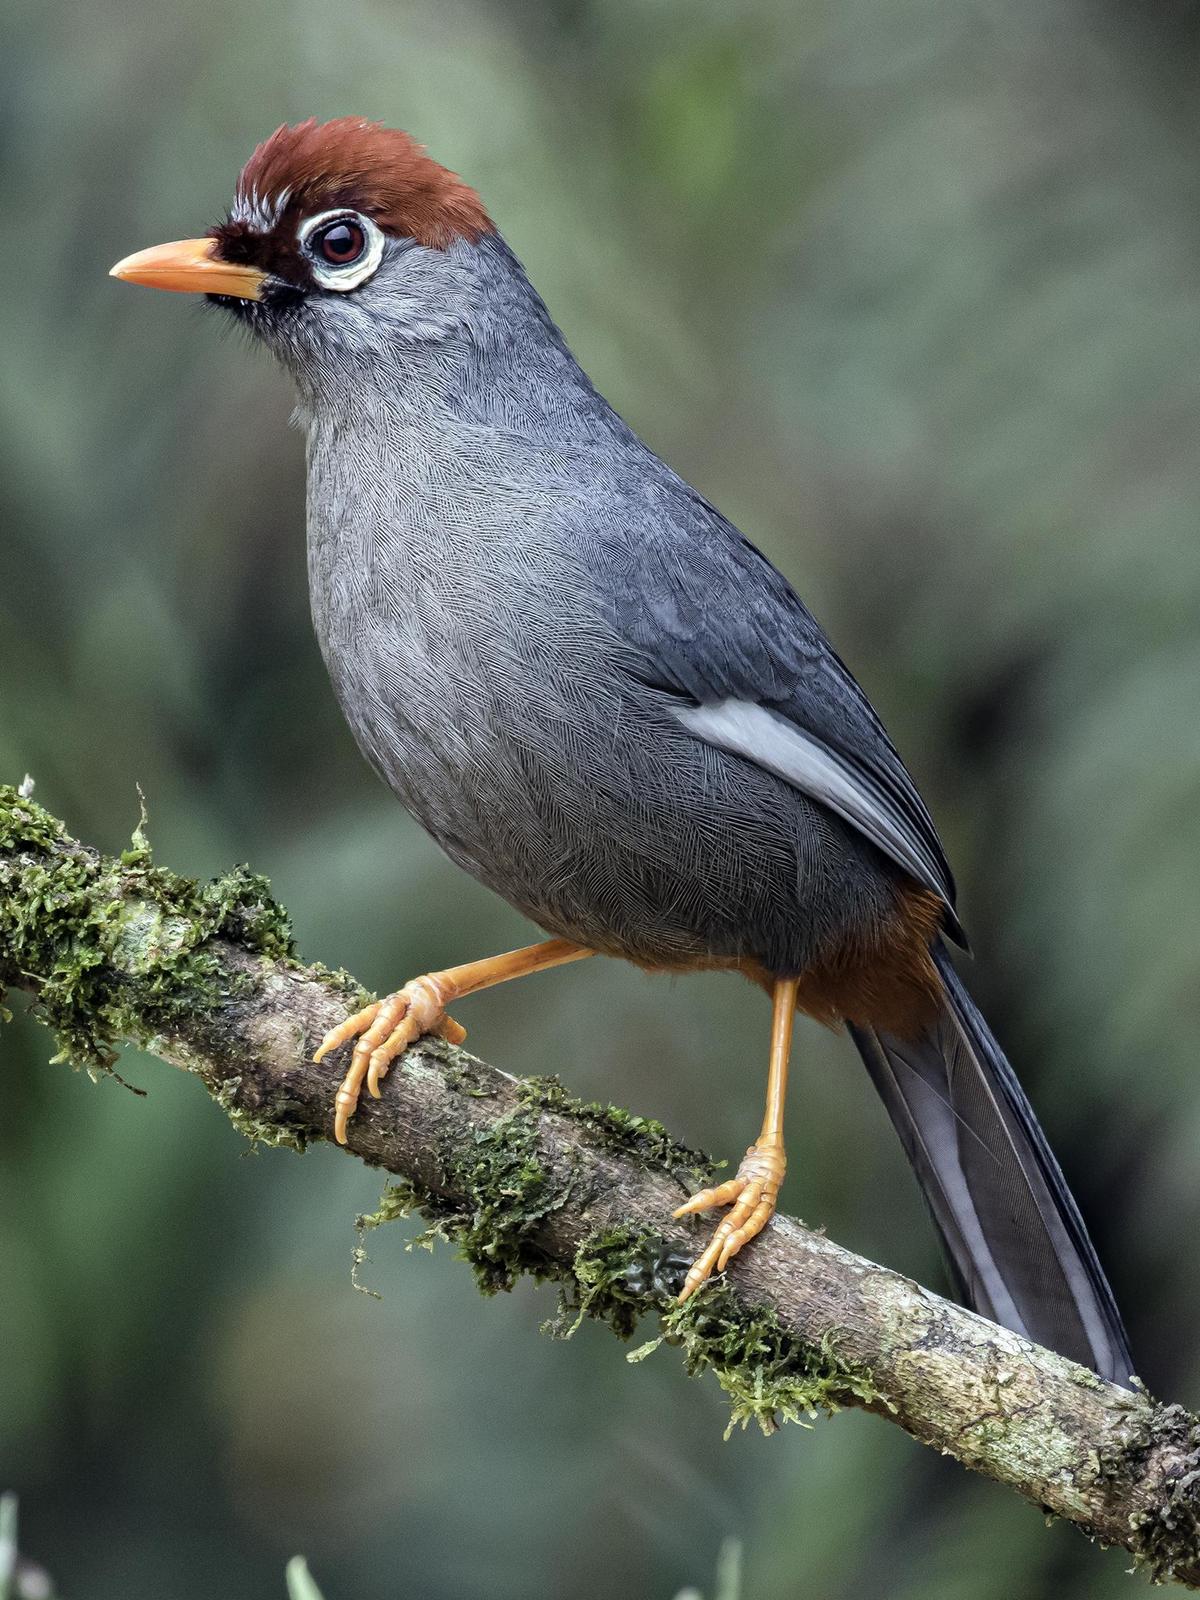 Chestnut-capped Laughingthrush Photo by Michael Phua